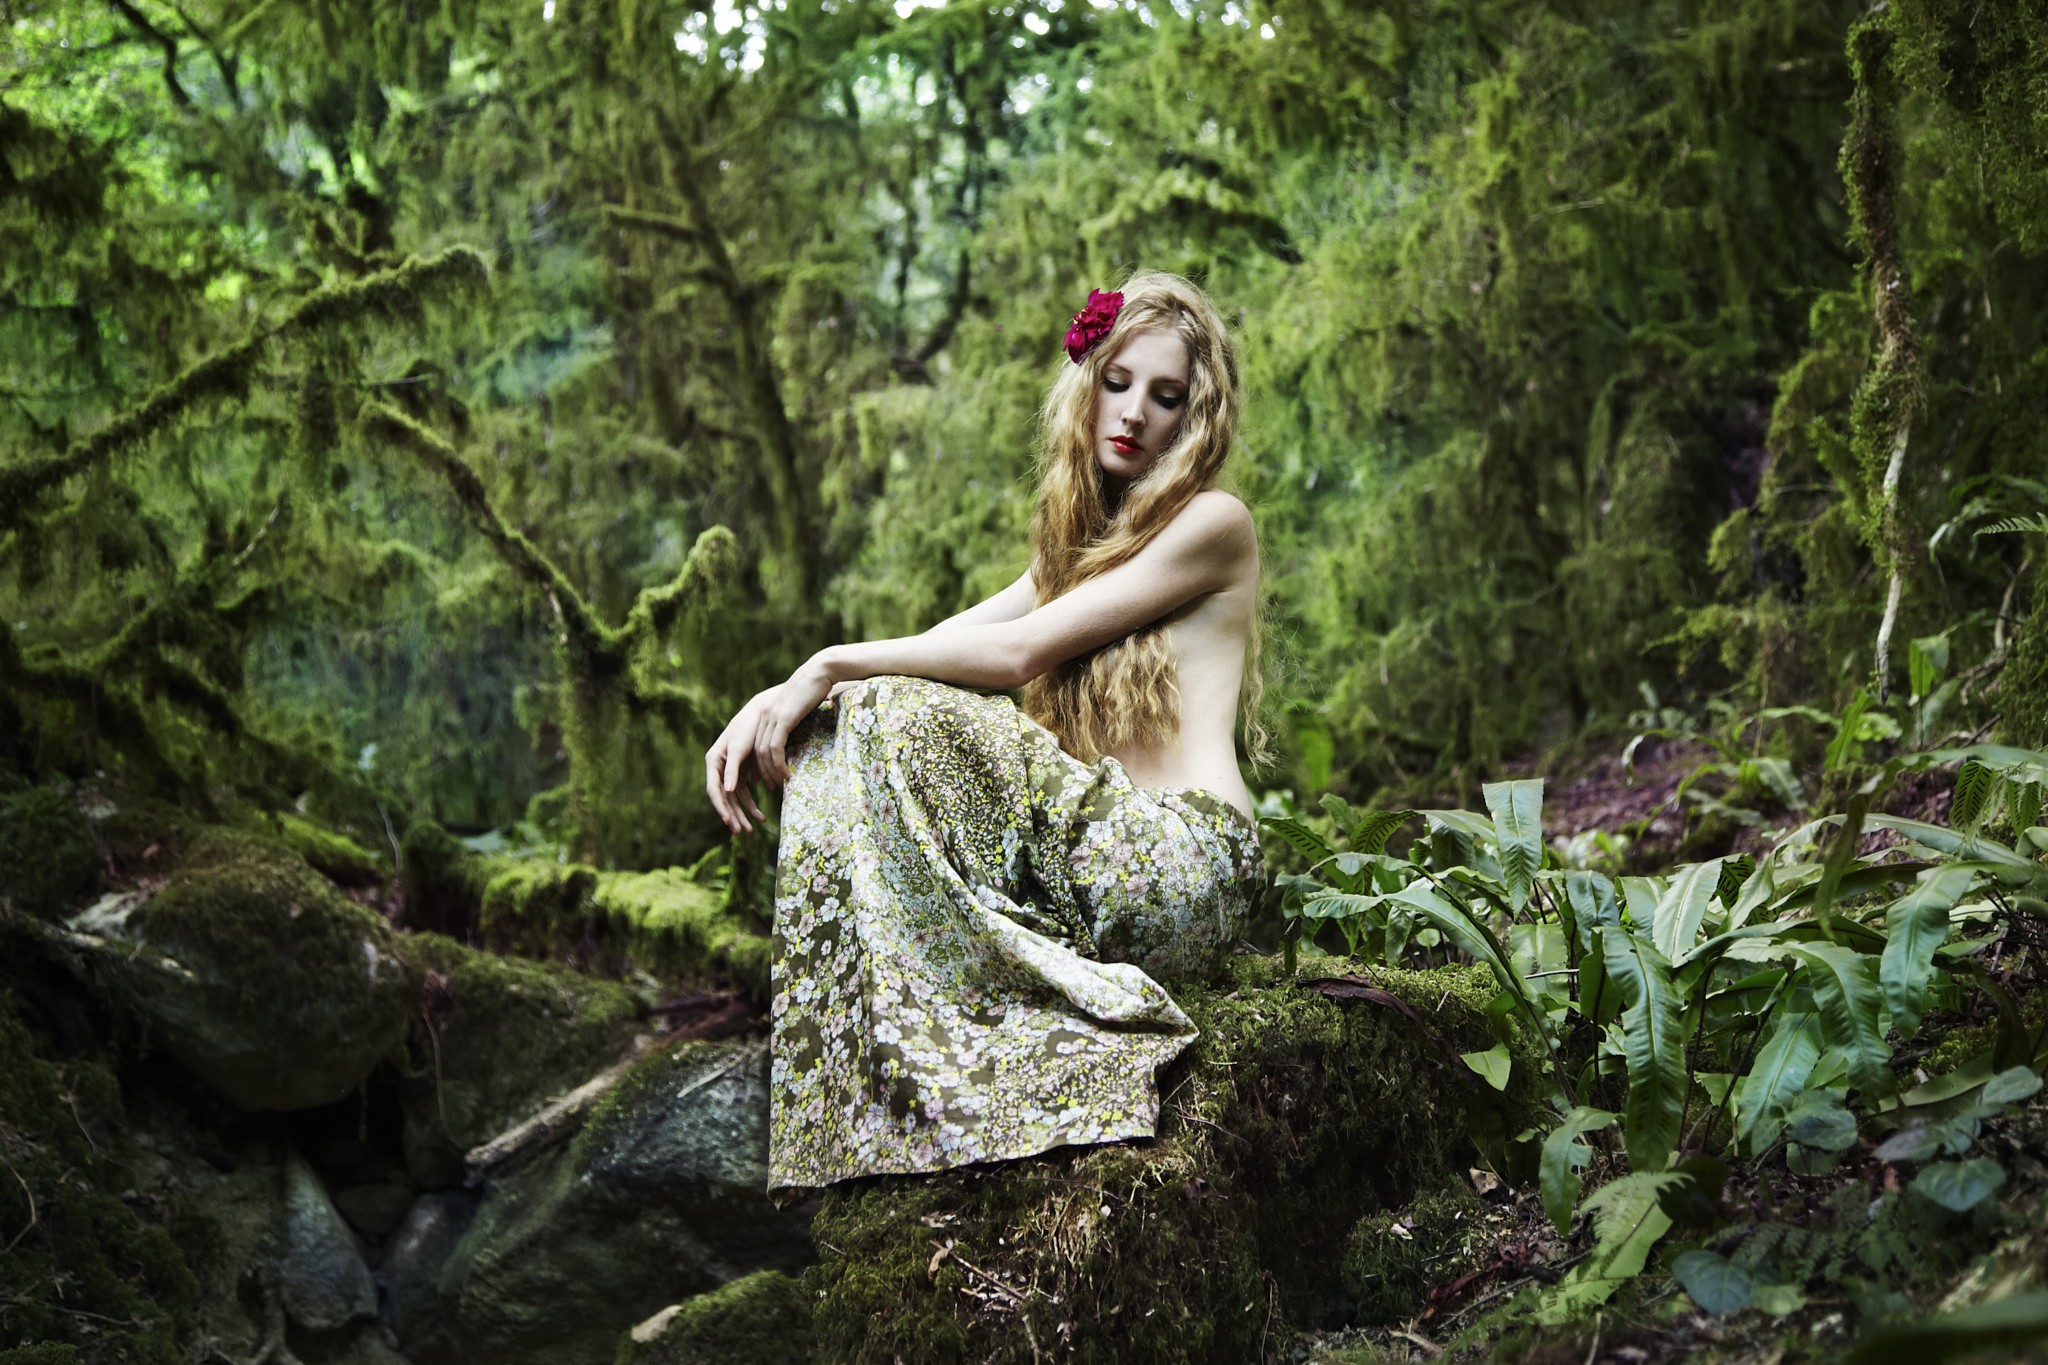 People 2048x1365 blonde women model looking away moss rocks trees plants outdoors women outdoors sitting makeup red lipstick flower in hair strategic covering hair over nipples